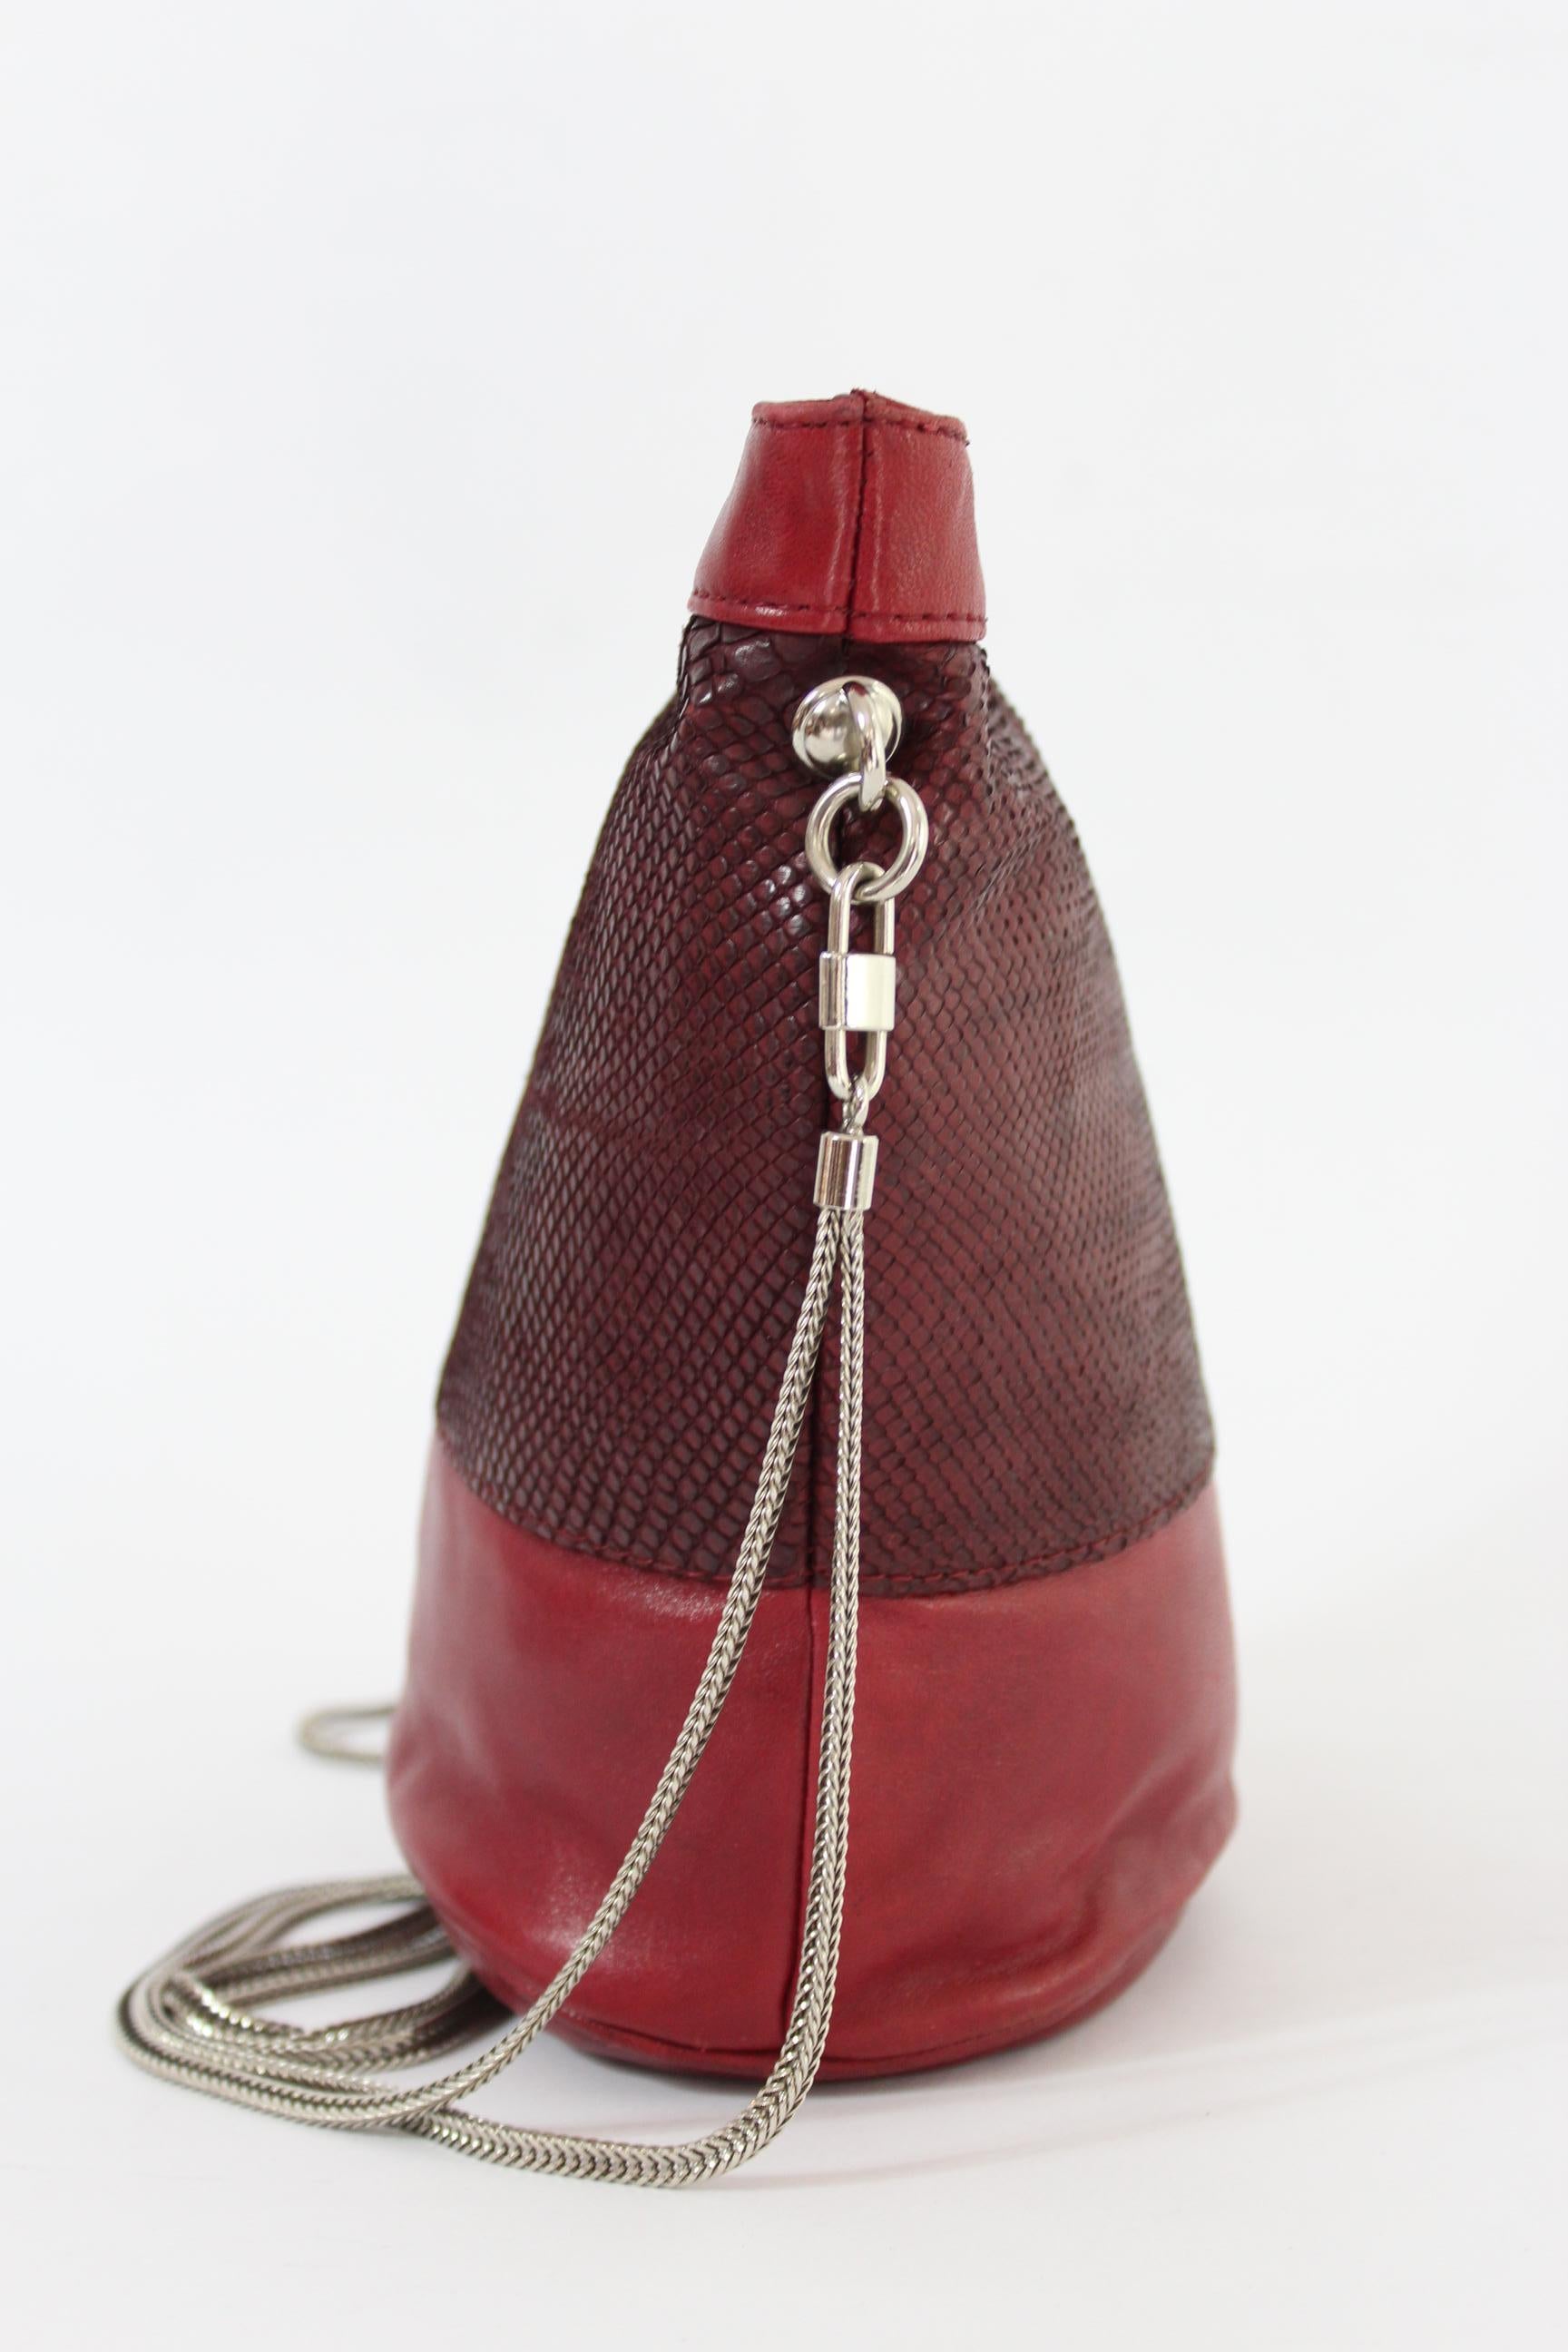 Gianni Versace Red Reptile Leather Shoulder Bucket Bag 1980s 3